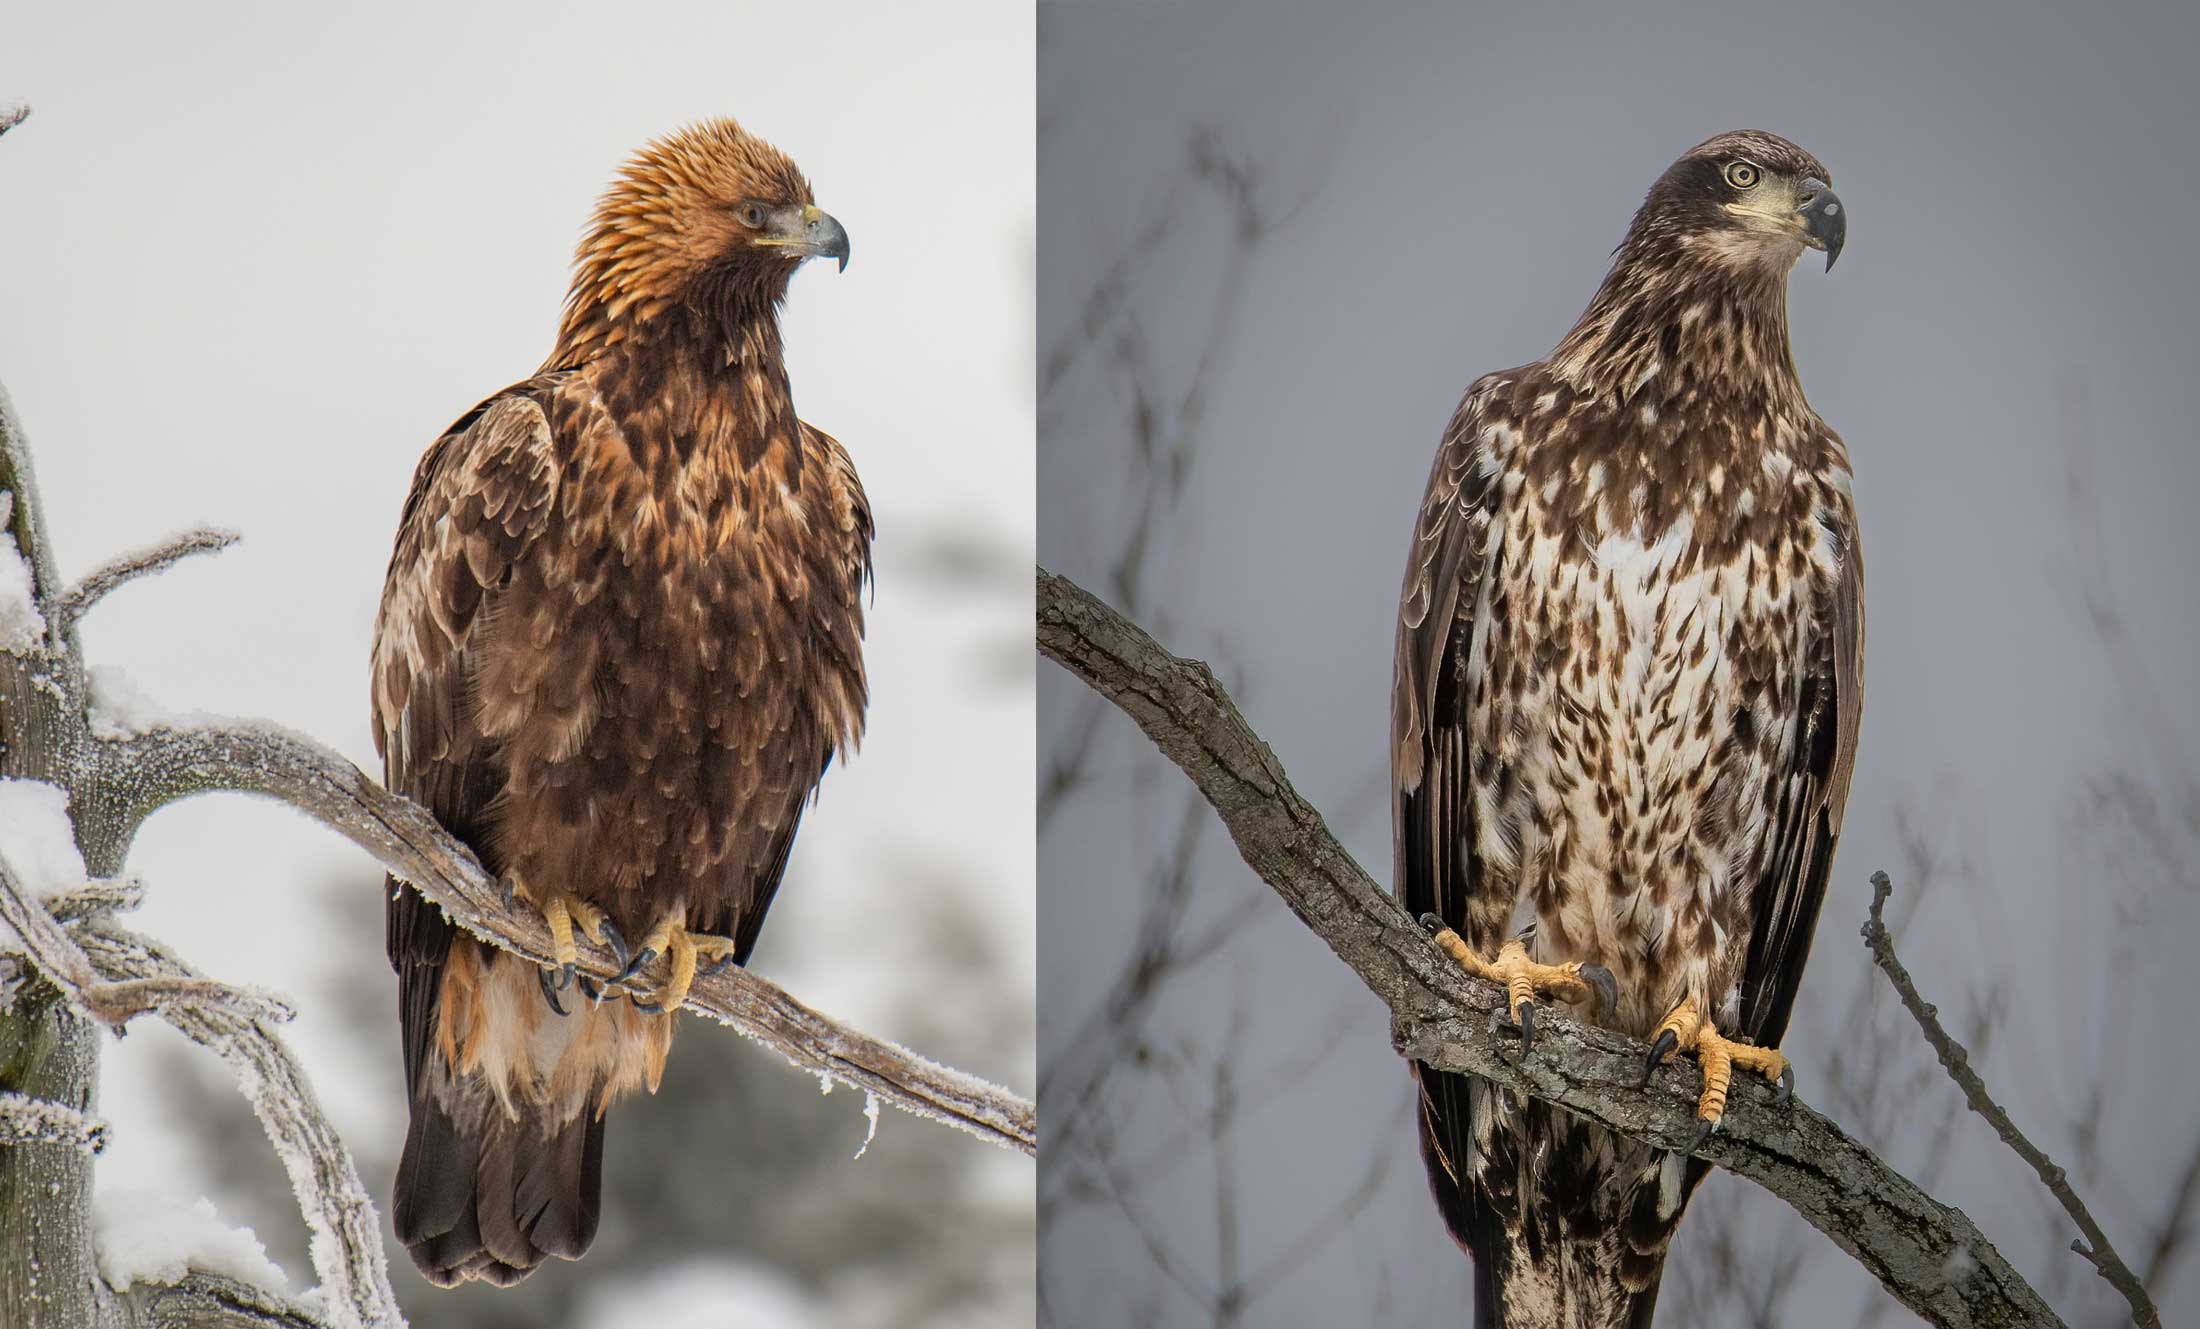 golden eagle on the left and bald eagle on the right